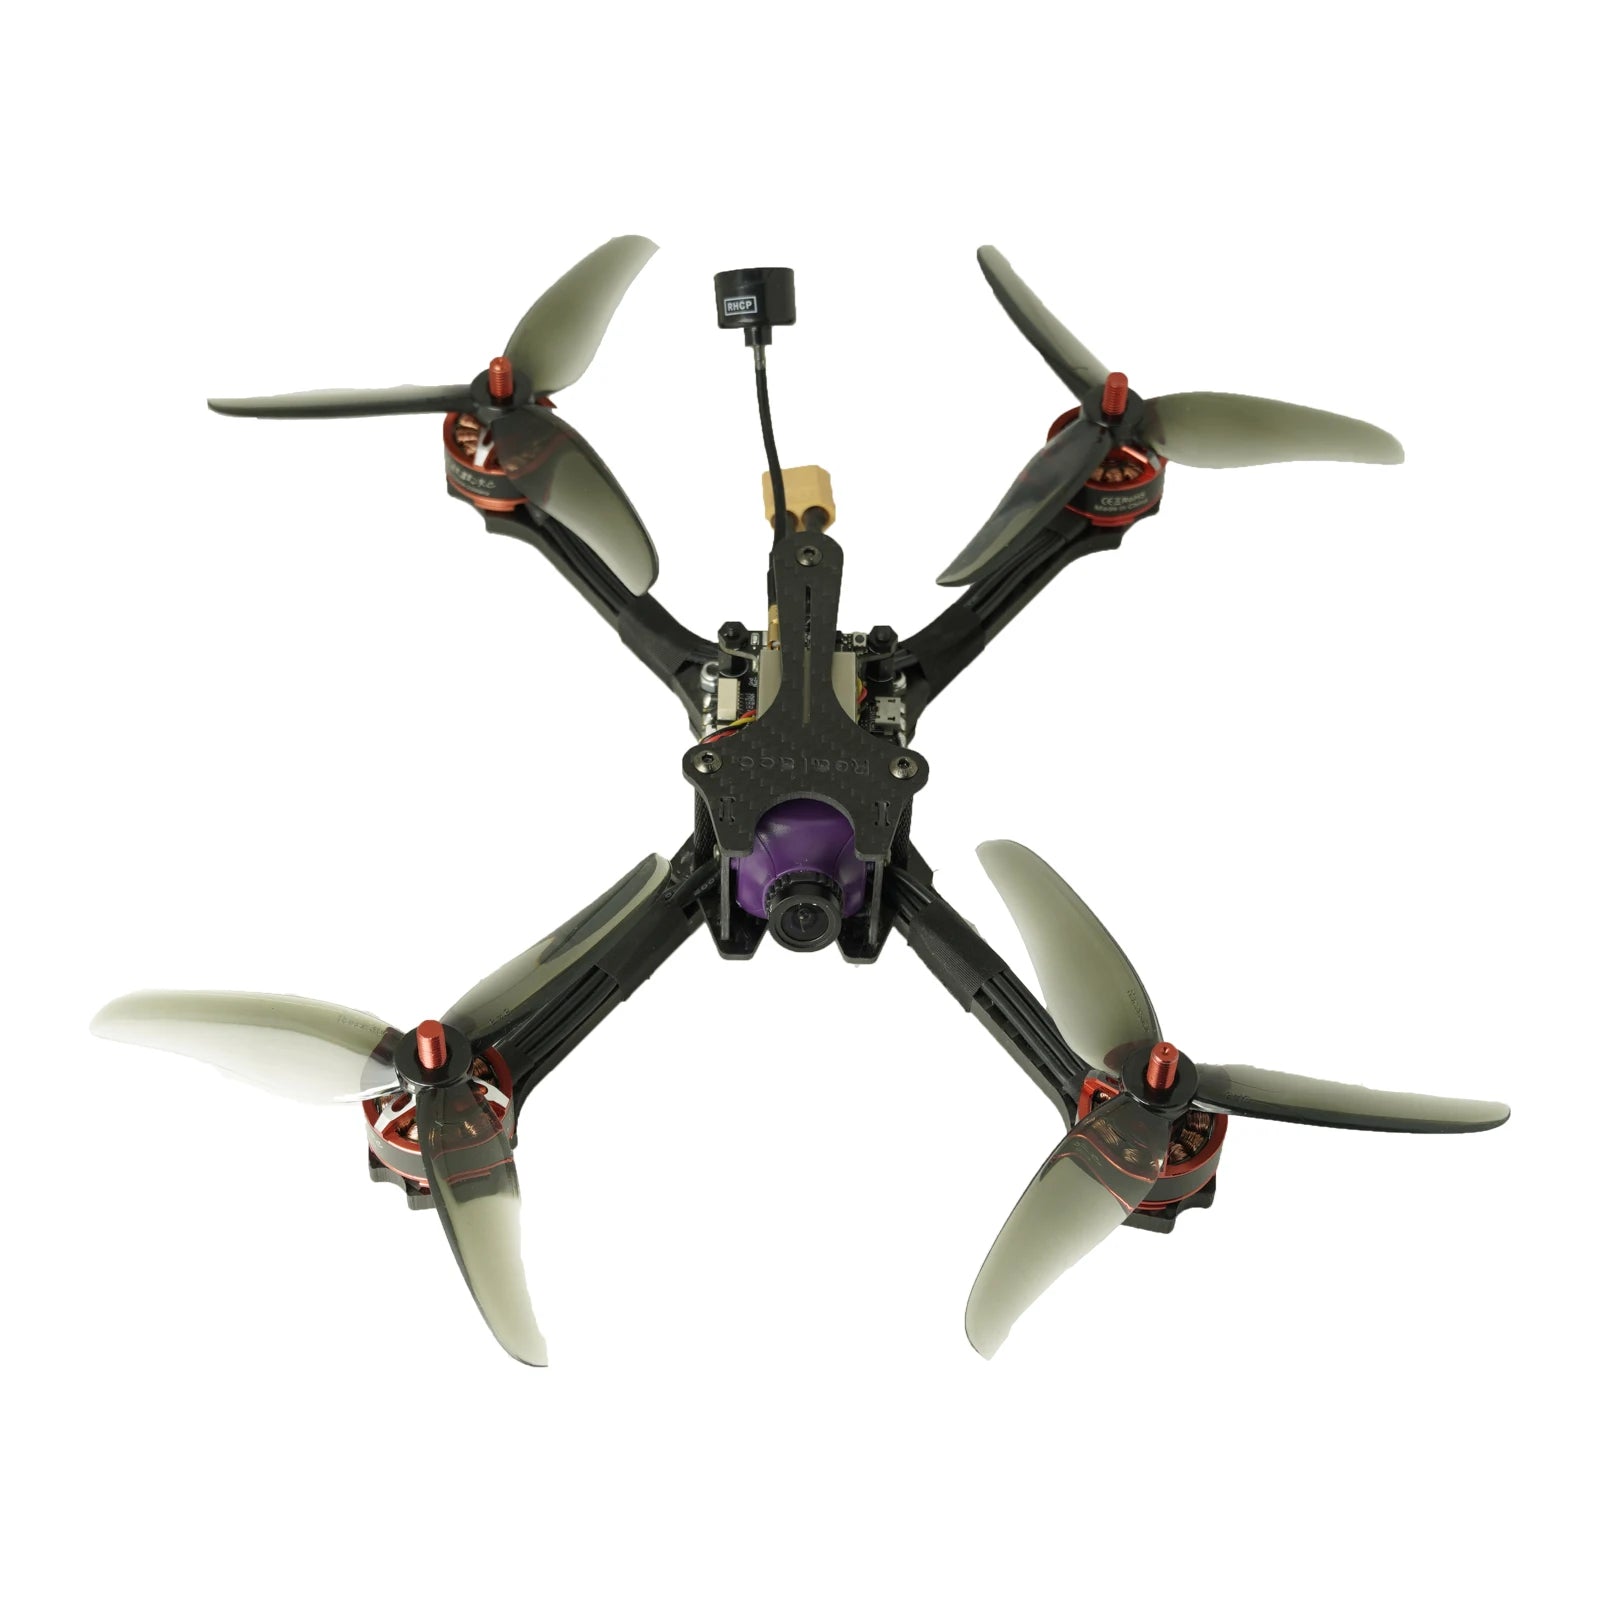 TCMMRC Xtreme 210 Racing Drone, the TCM-MRC Xtreme 210 Racing Drone incorporates safety features 